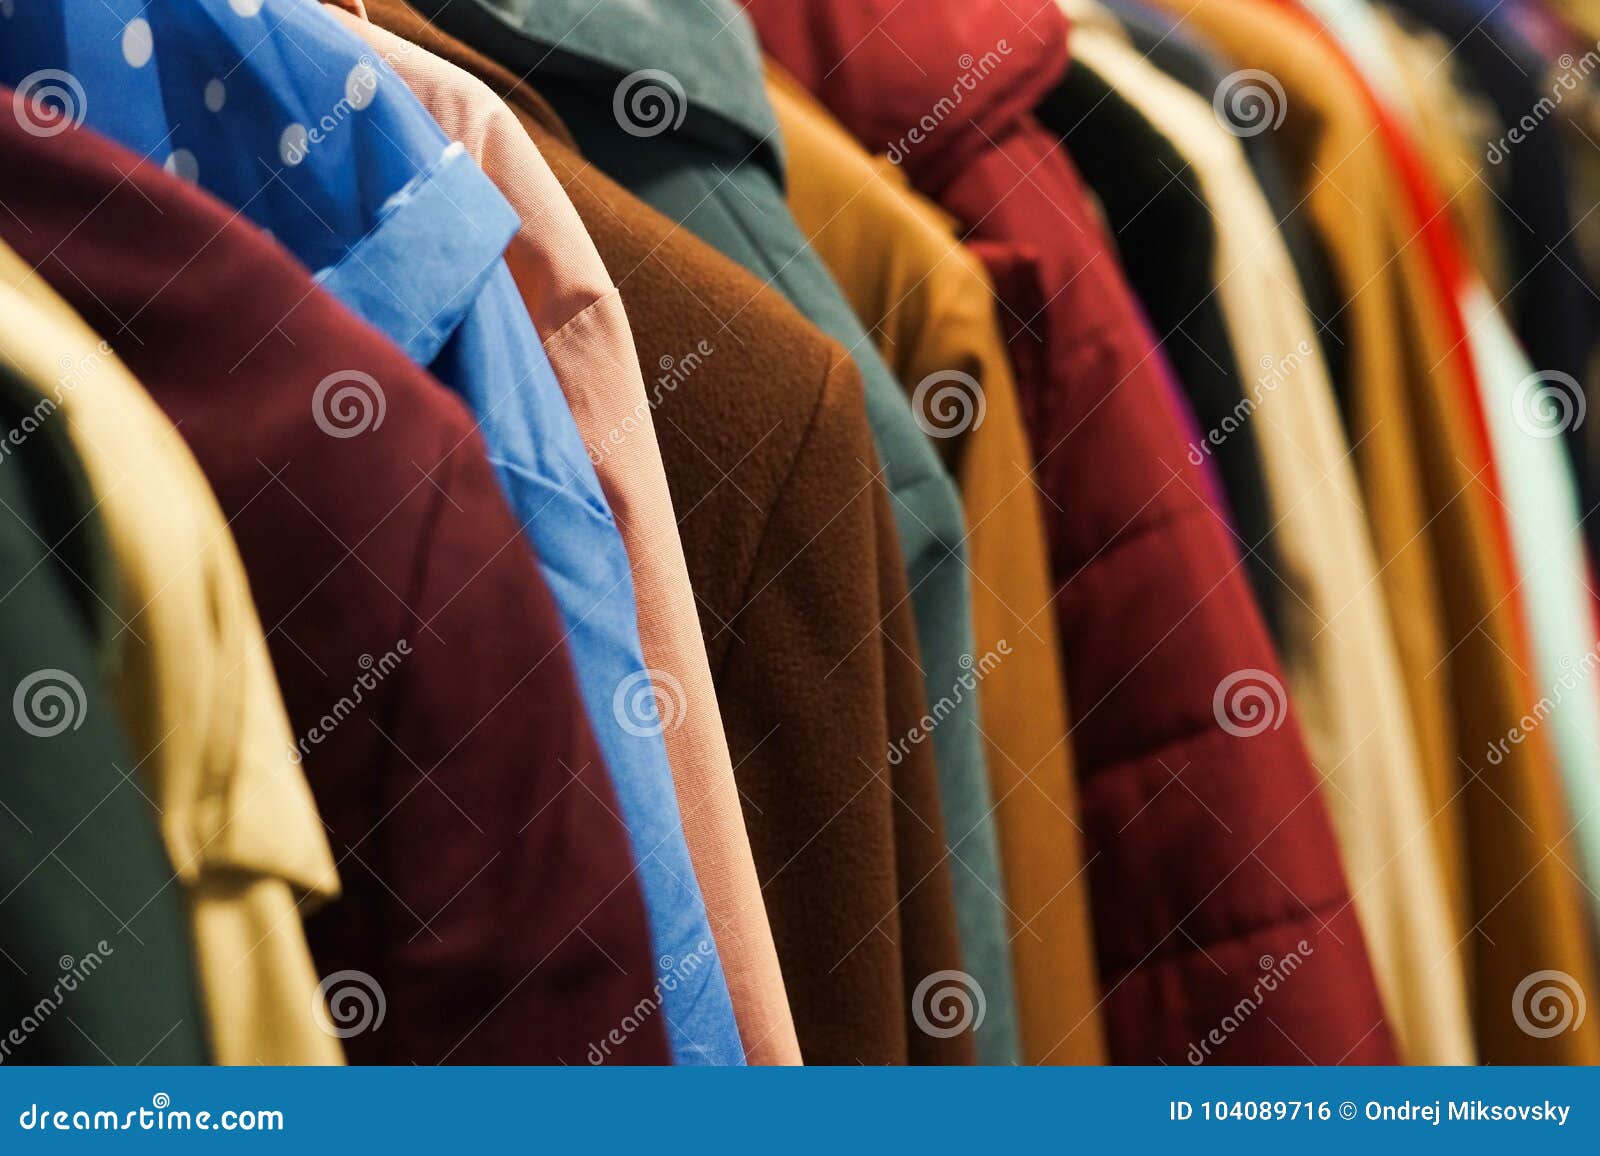 colourful coats in the charity shop.